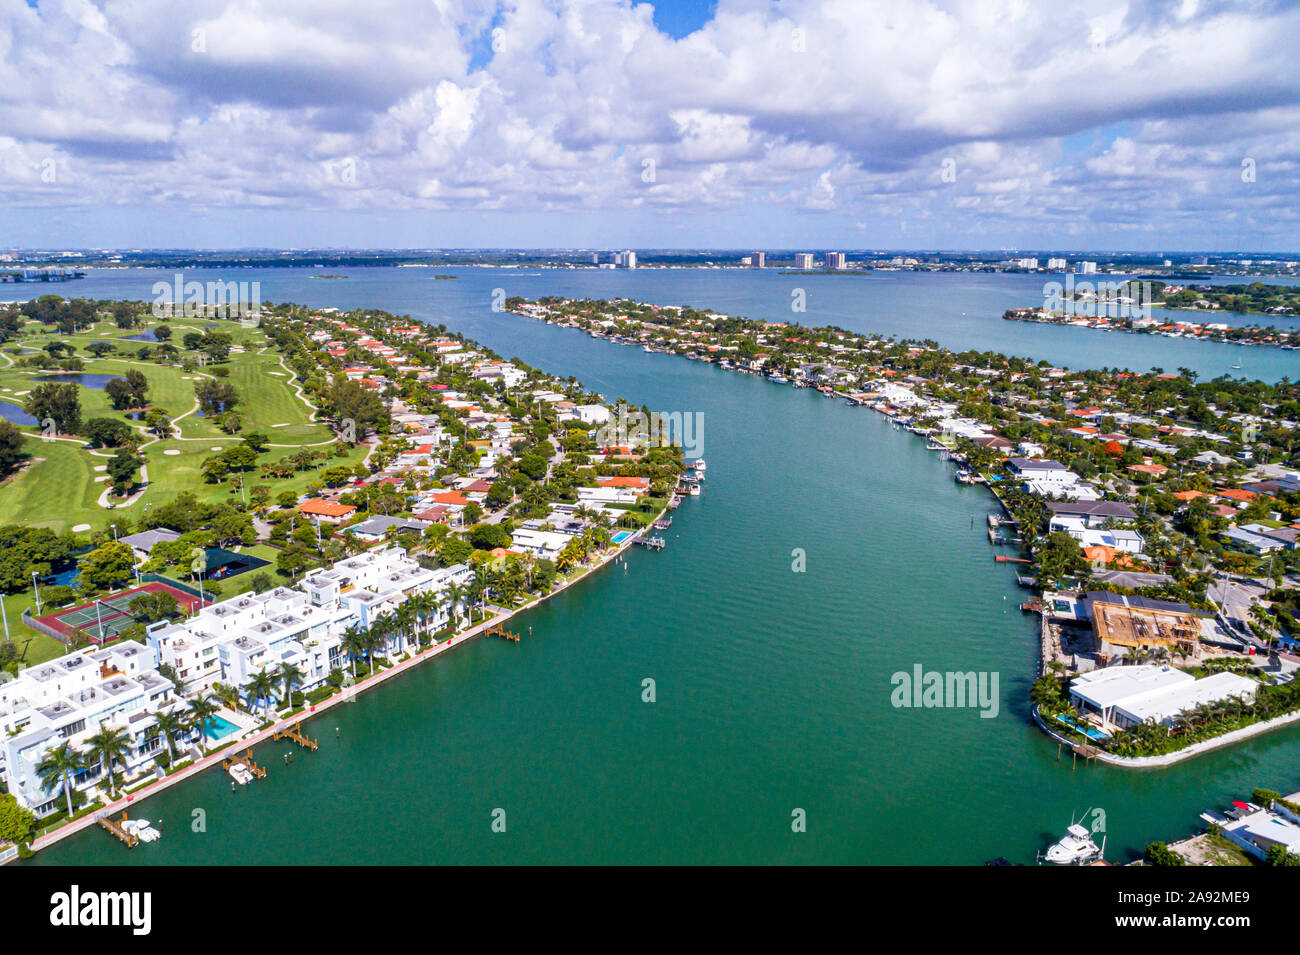 Miami Beach Florida,Normandy Shores golf course club,Biscayne Bay water waterfront homes residences,Iris On the Bay aerial, Stock Photo